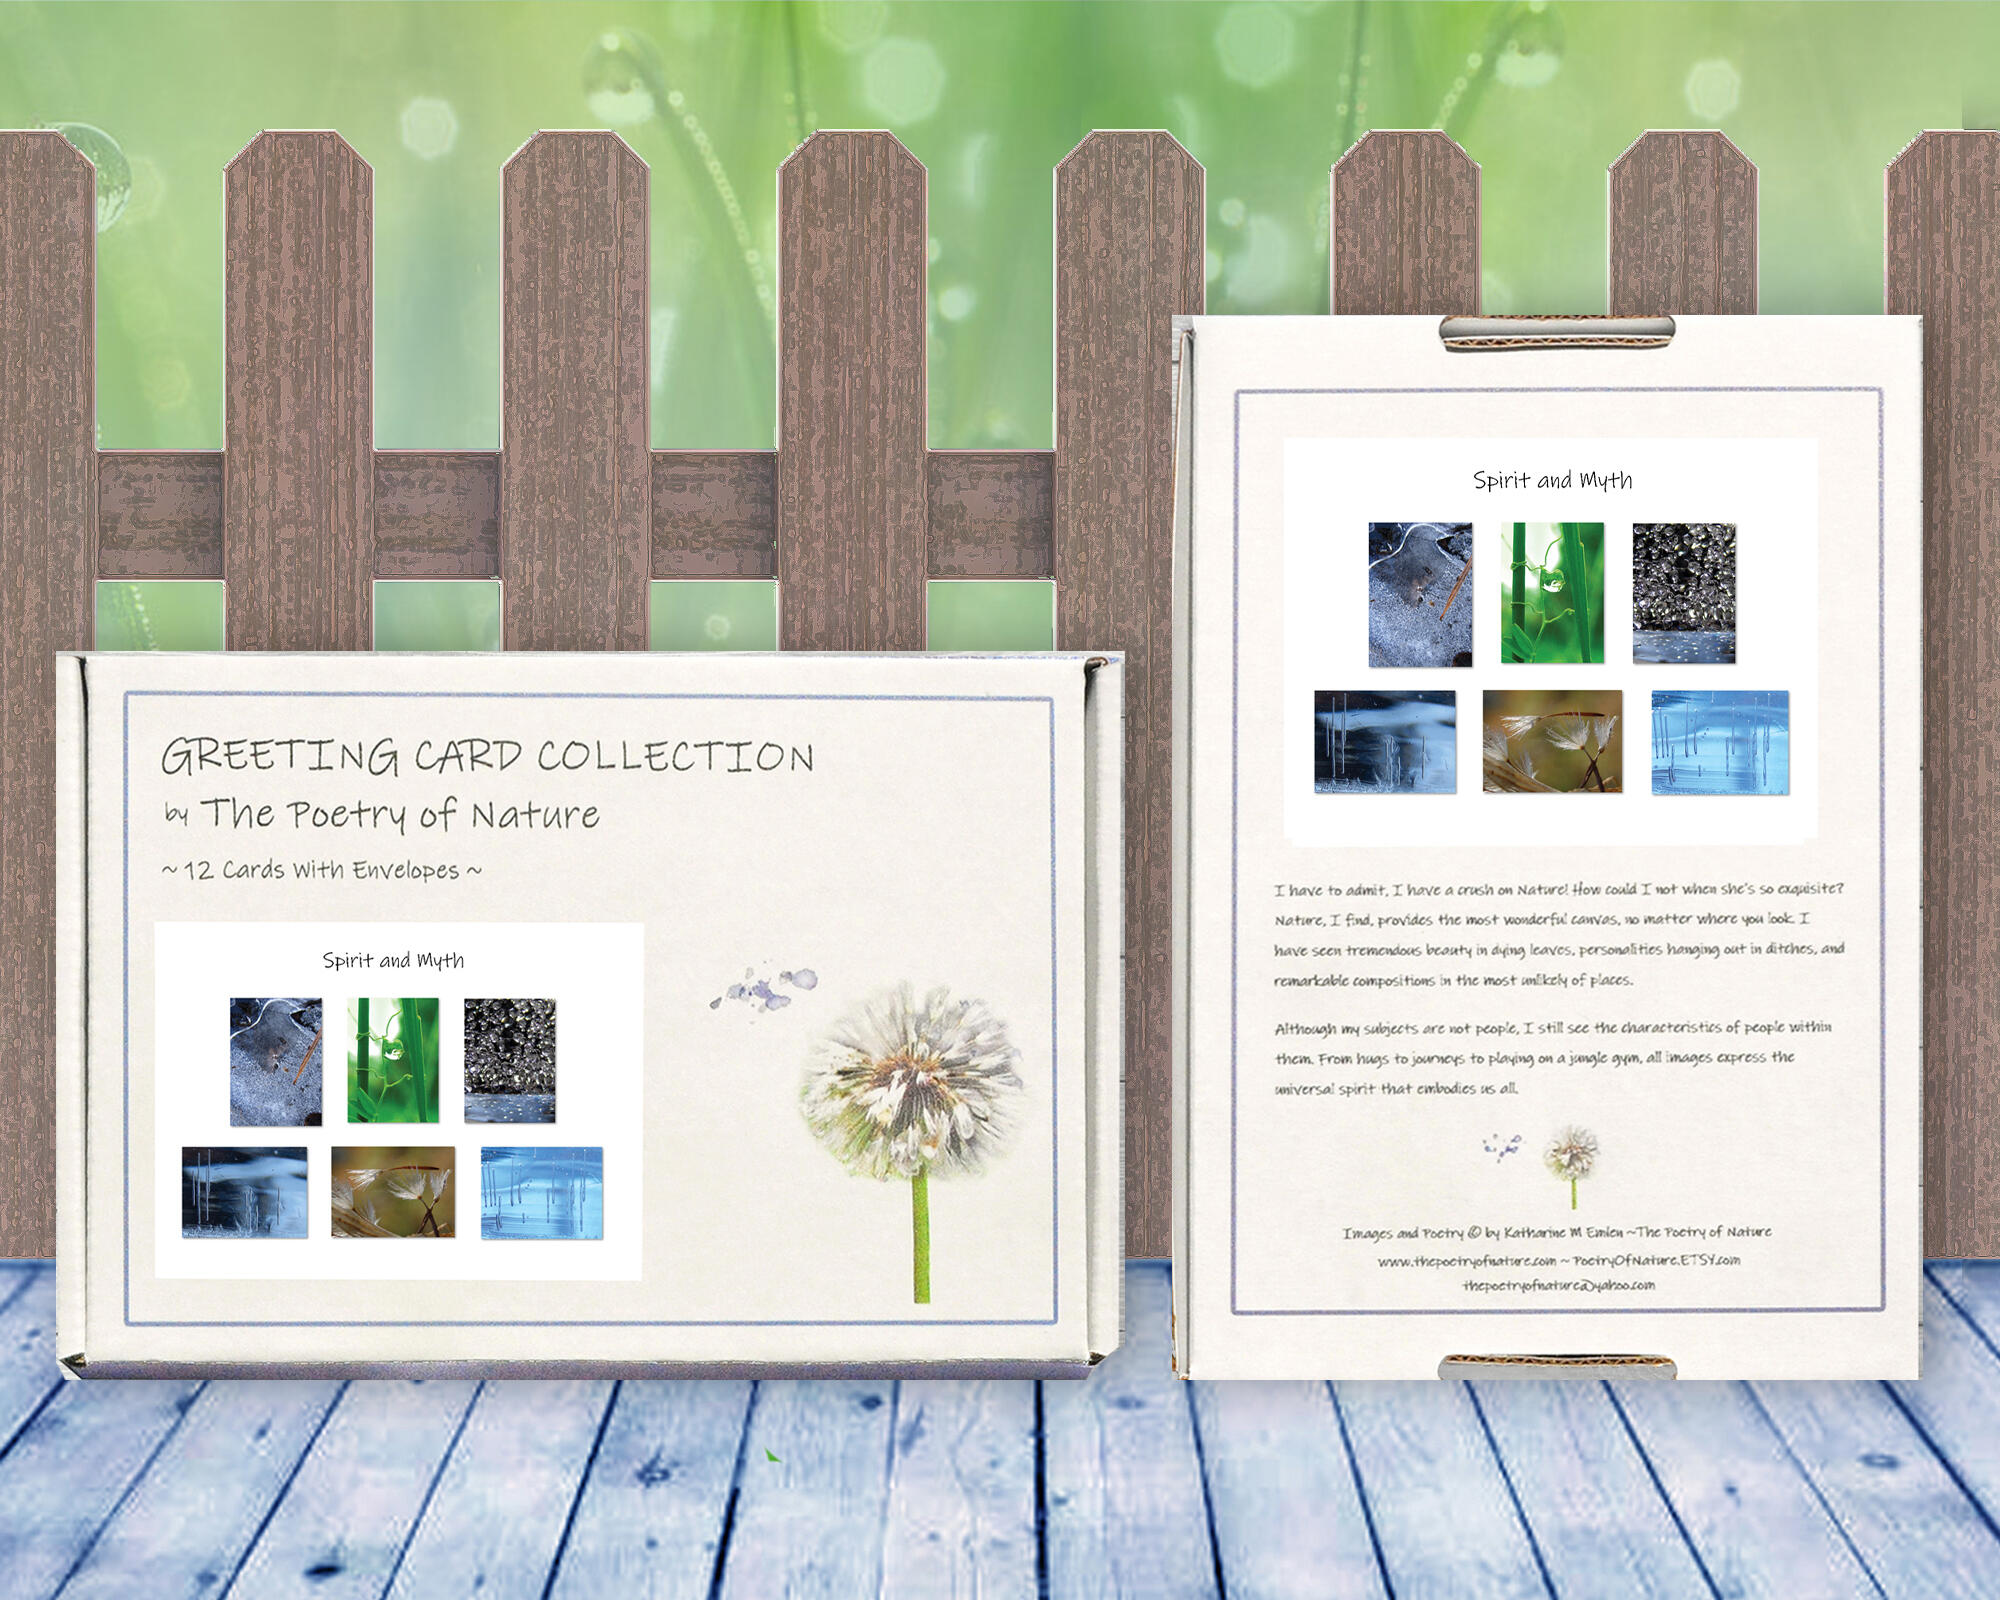 Spirit and Myth - Greeting Card Collection by The Poetry of Nature